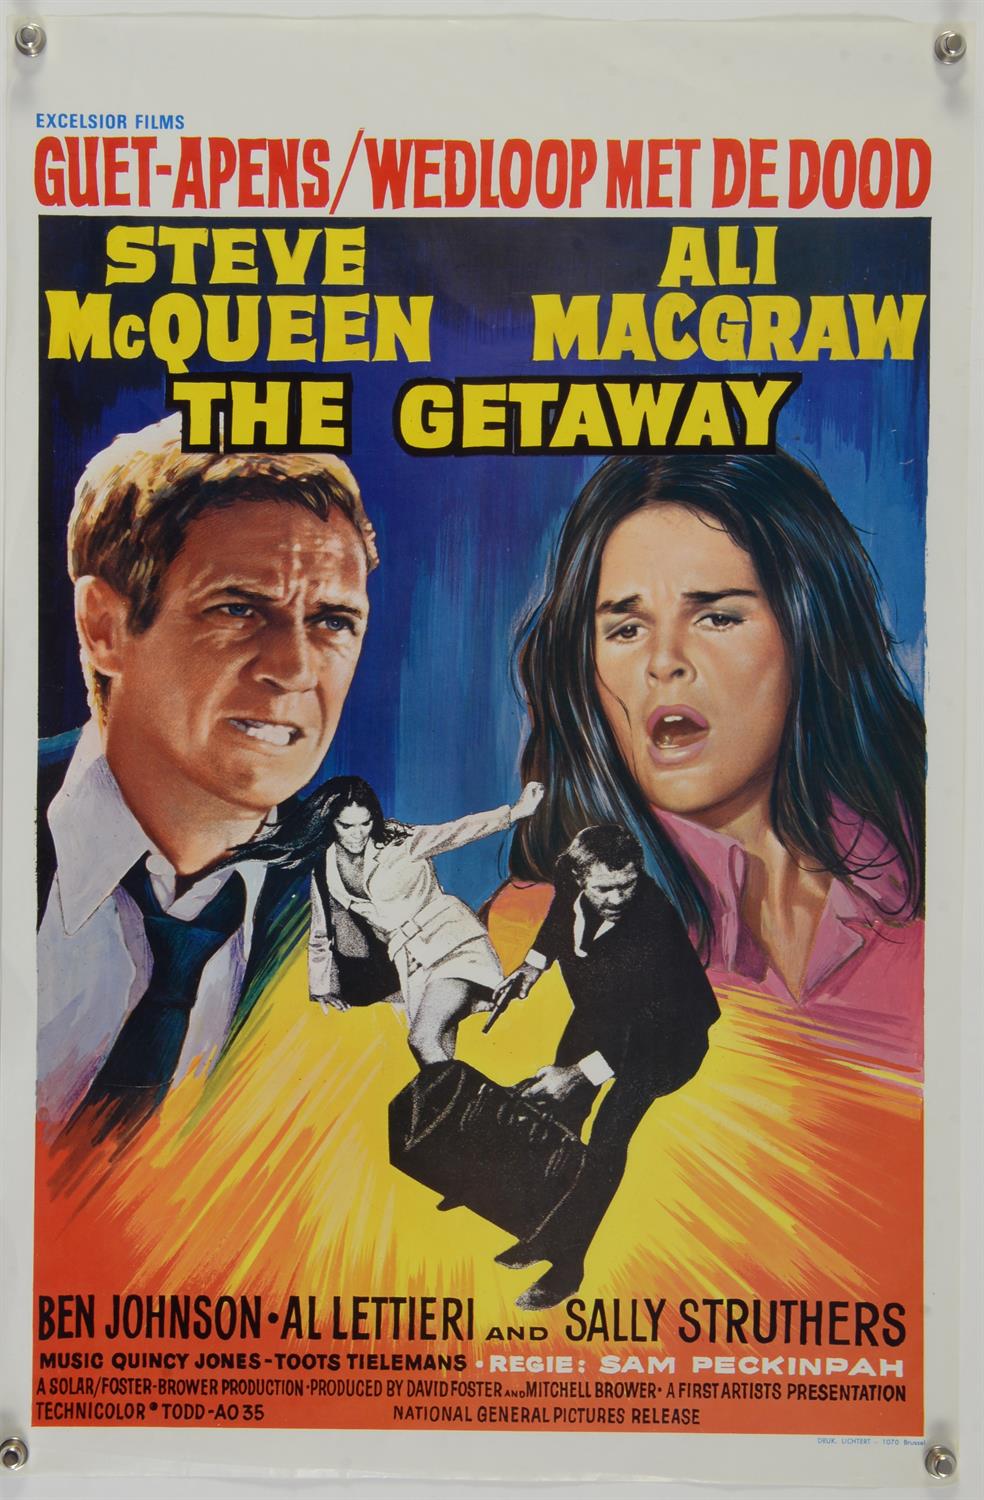 The Getaway (1972) Belgian film poster, 14 x 22 inches.